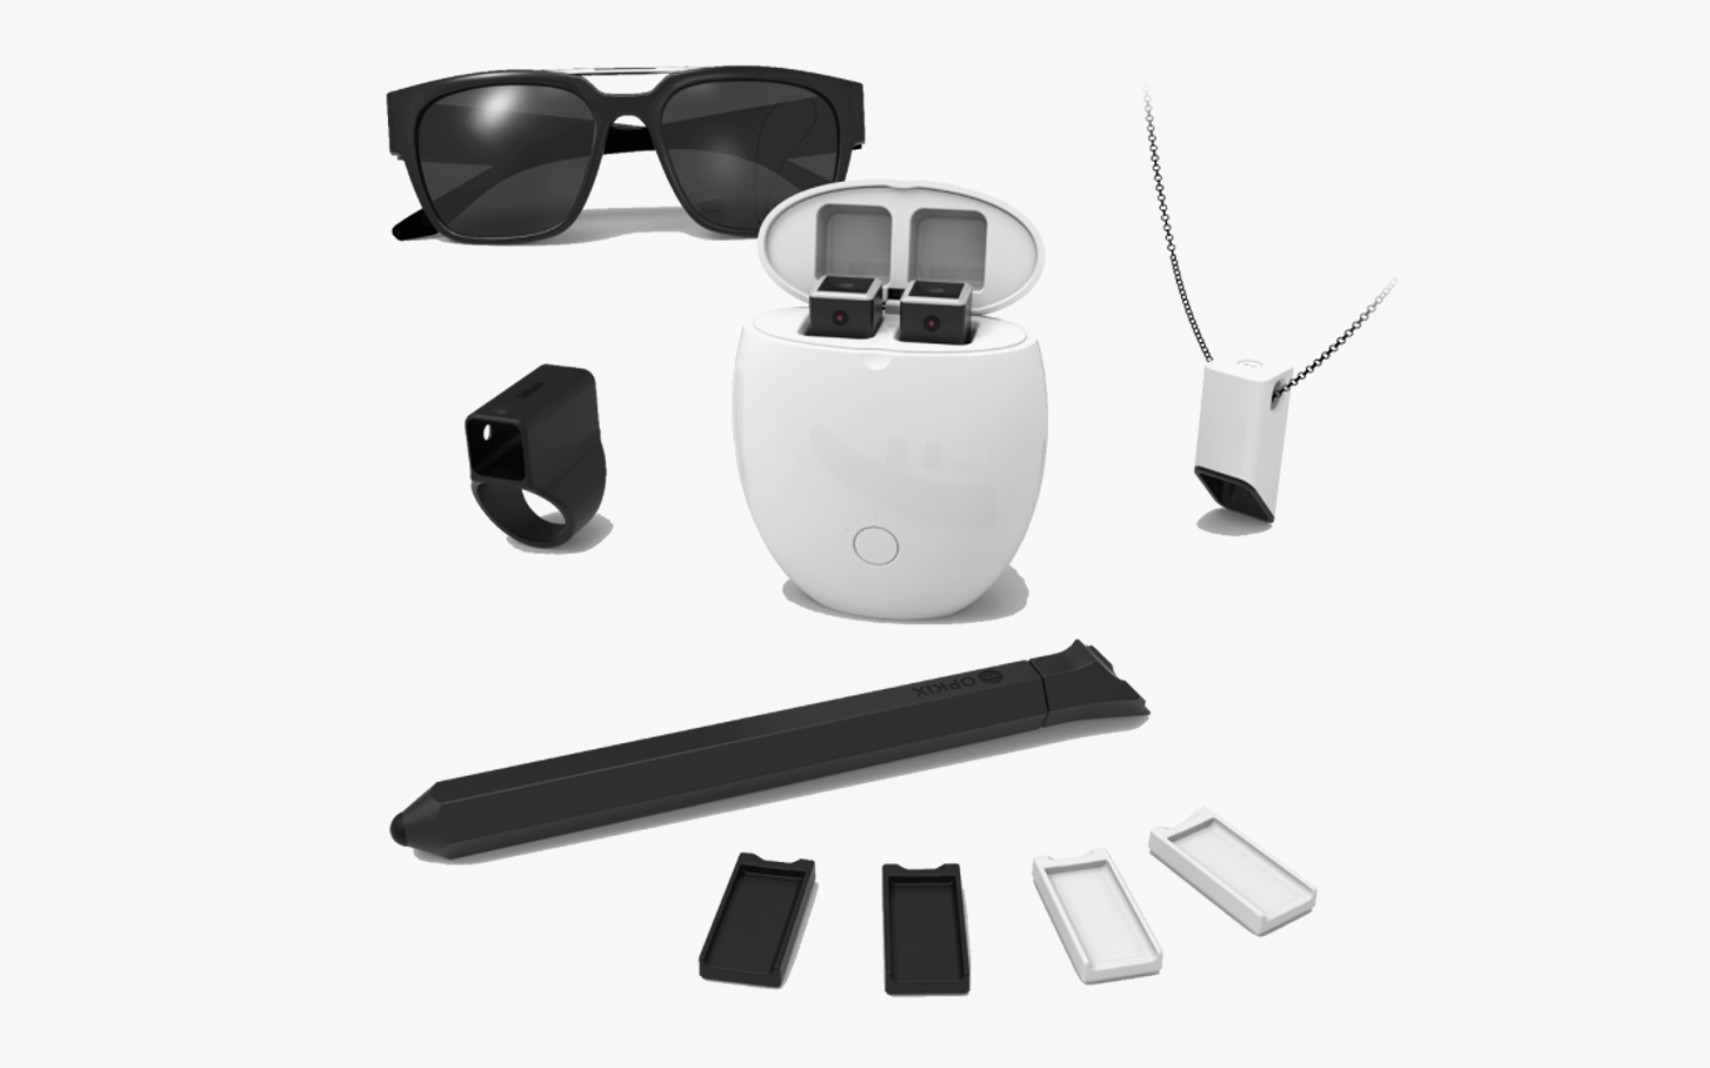 Opkix One Wearable Cameras